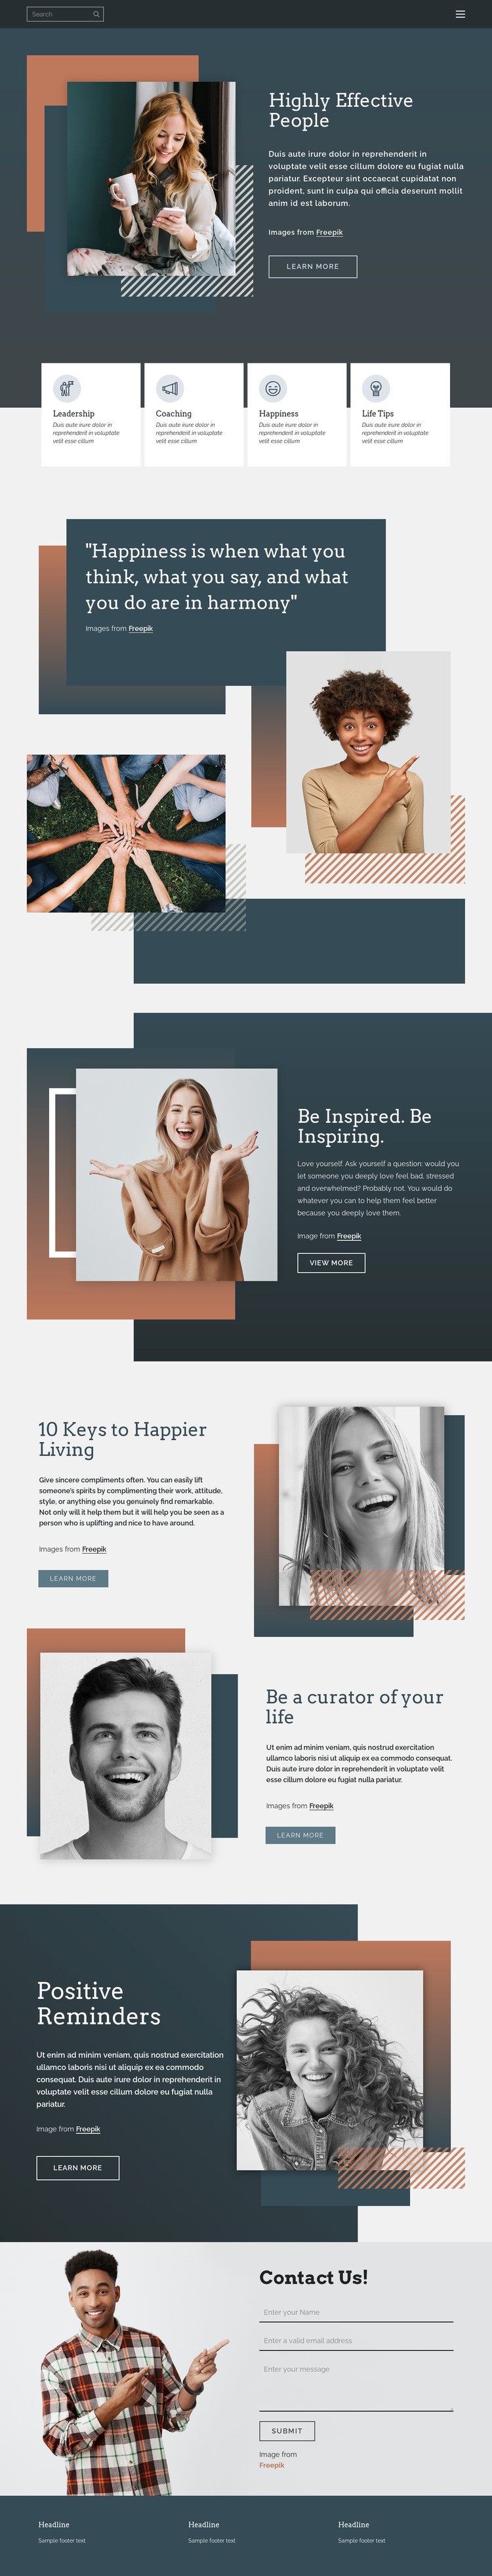 How to be successful in life Webflow Template Alternative